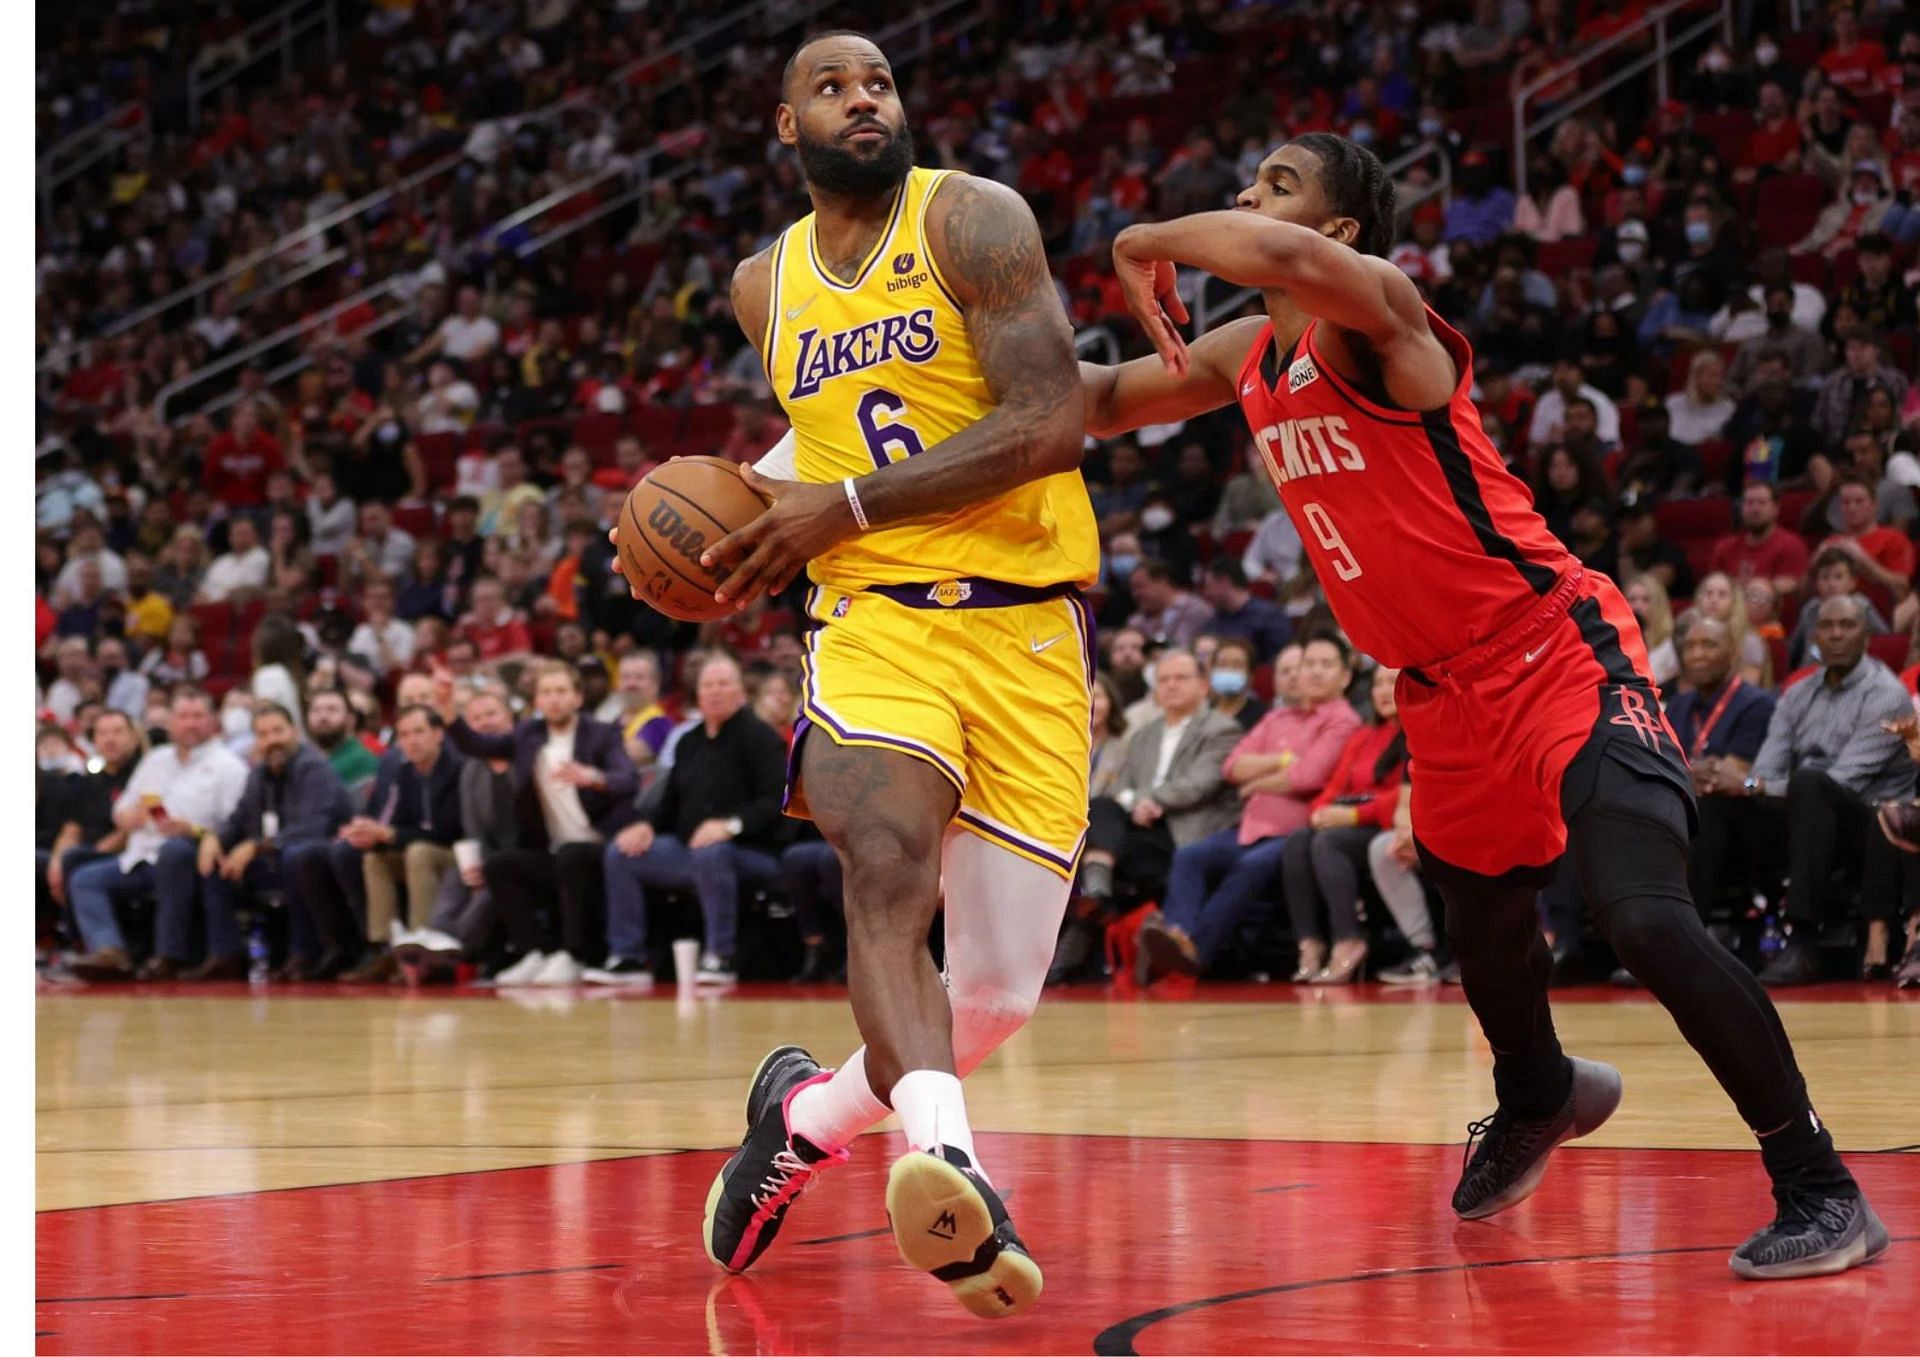 LeBron James and Jabari Smith Jr. had an interesting and hilarious back-and-forth early in the game between the Houstron Rockets and LA Lakers.